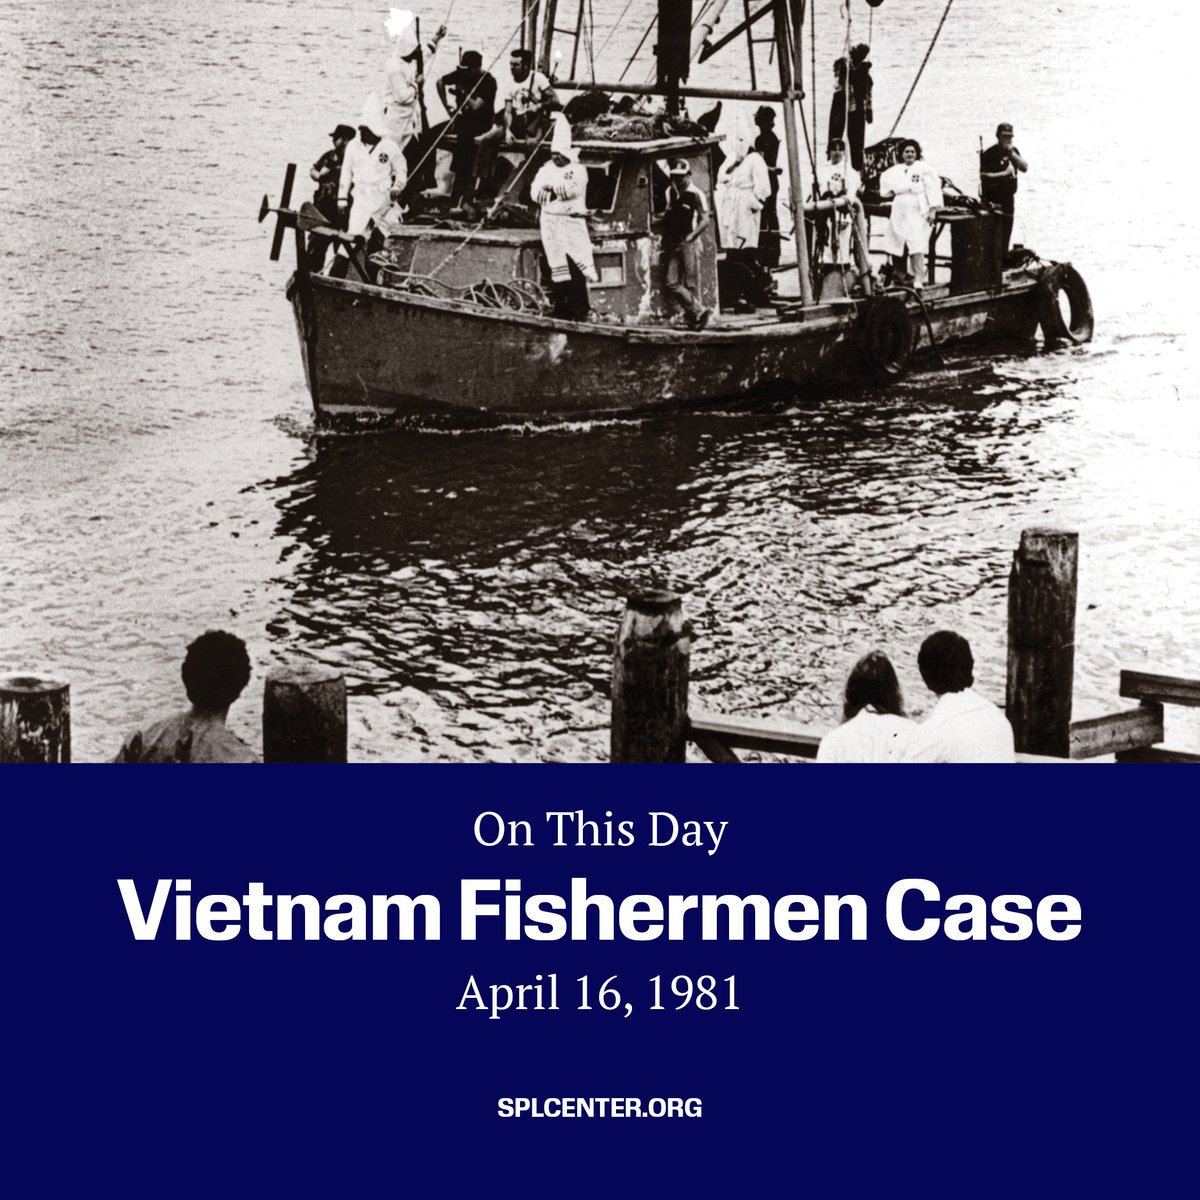 #OTD in 1981, the SPLC filed a lawsuit that led to the end of the Klan's attempts to destroy Vietnamese Americans' fishing businesses by burning their boats and threatening their lives. Learn more about the case here: bit.ly/3xJXlnw #TheMarchContinues